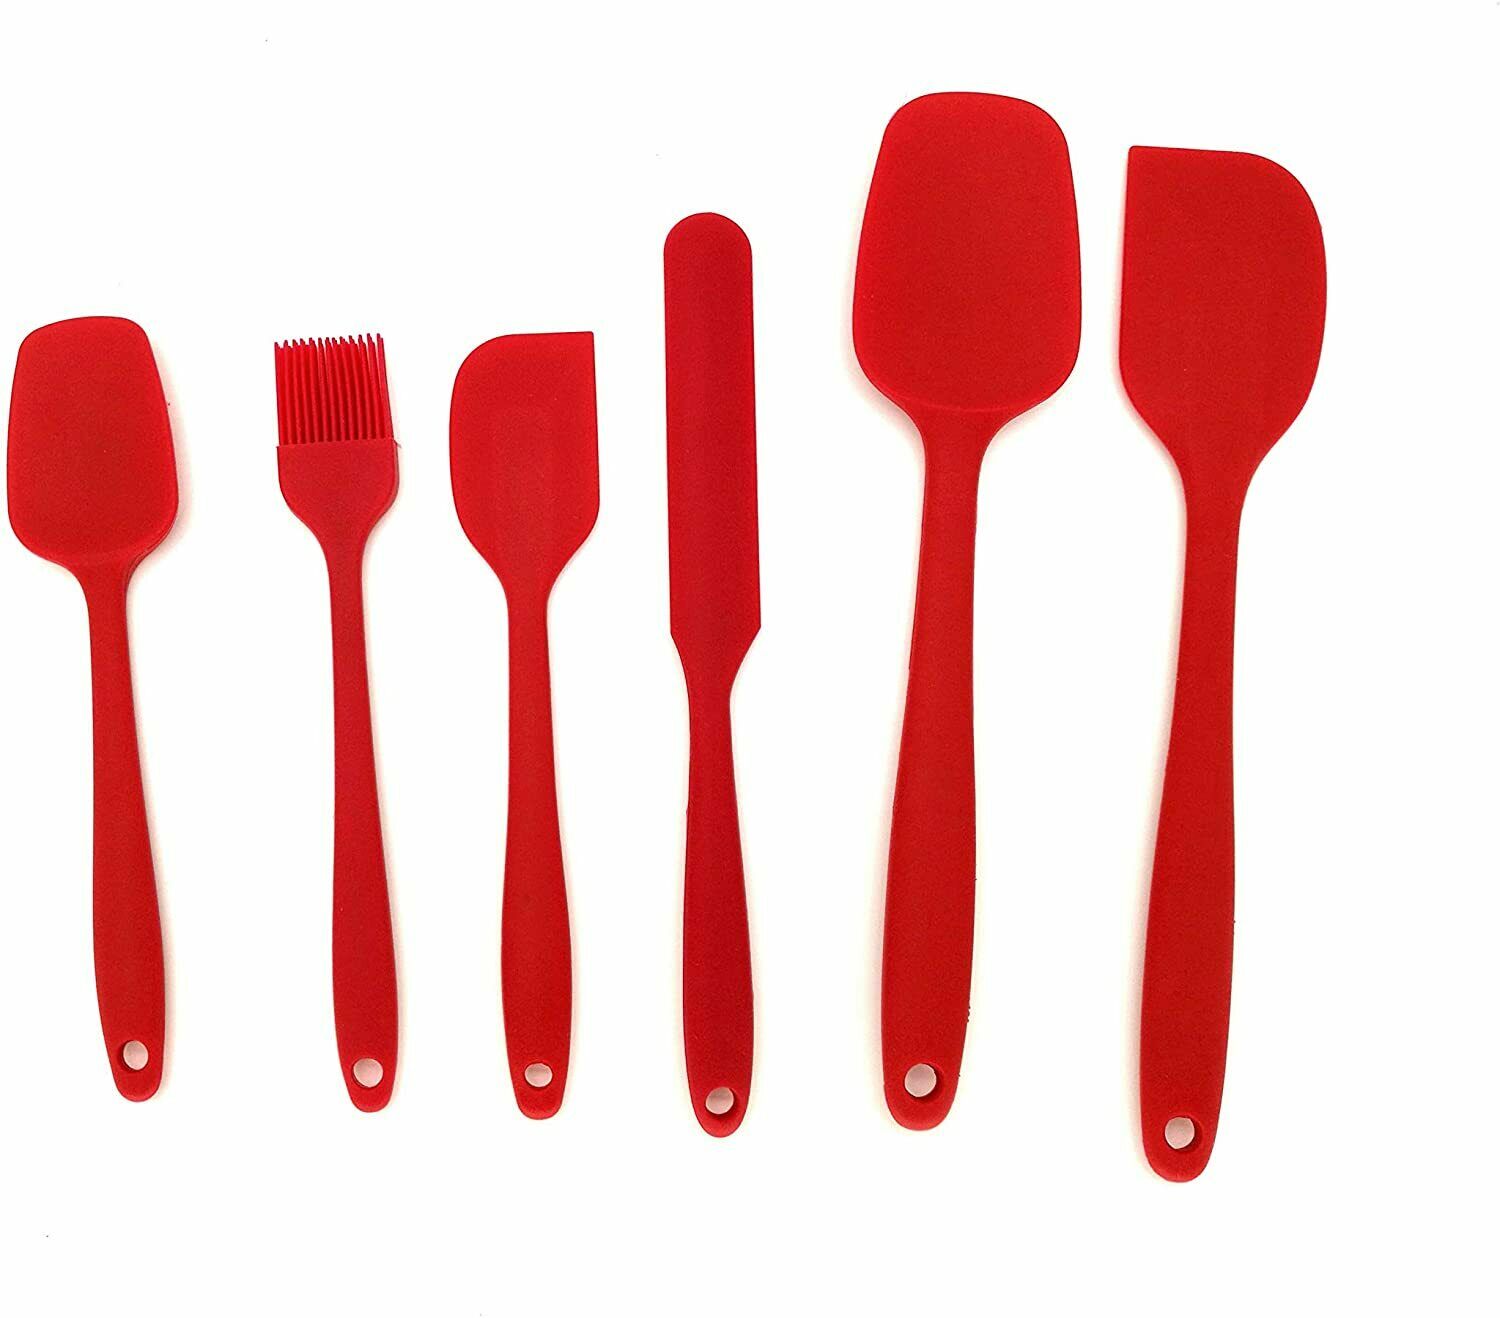 6 Piece Silicone Spatula Set - Heat Resistant Nonstick Spatulas Set with  Stainless Steel Core, Food …See more 6 Piece Silicone Spatula Set - Heat